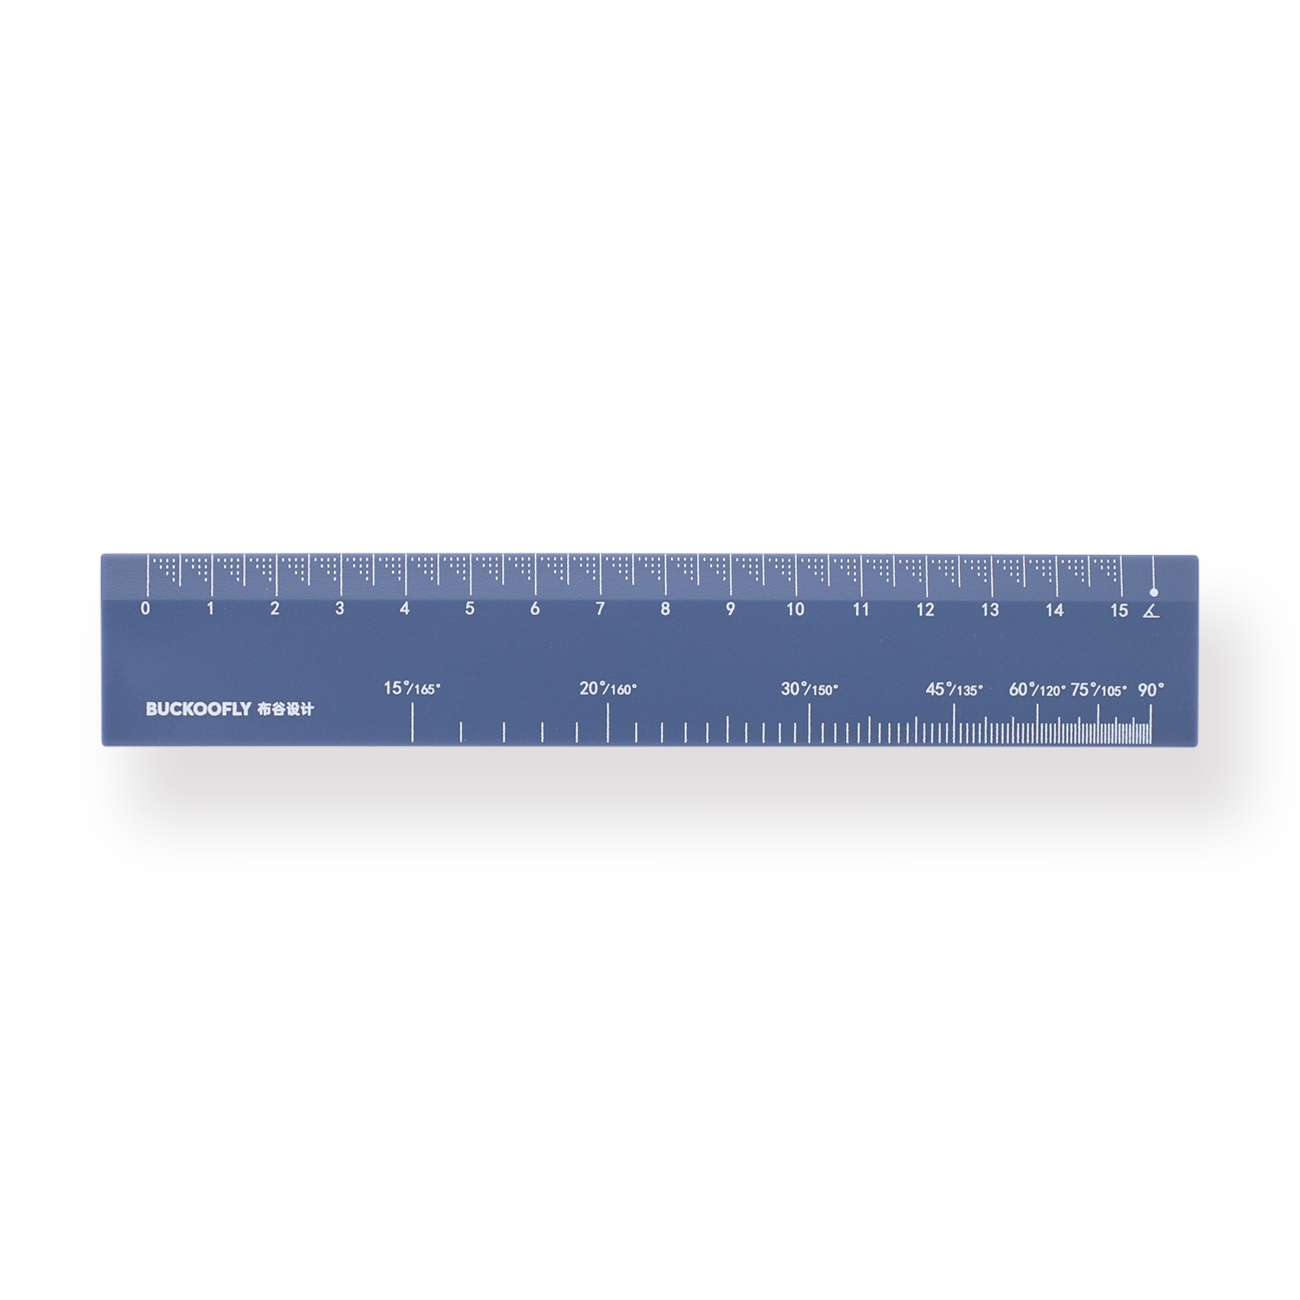 Rolling Ruler, 5.9 inches (15 cm), Plastic, Practical Measurement,  Versatile Ruler, Rolling Ruler, Convenient Ruler, Drafting, DIY,  Protractor, Straight, Parallel, Angle, Parallel Ruler, Stationery, Line  Drawing, Picture, Graph, Office Supplies